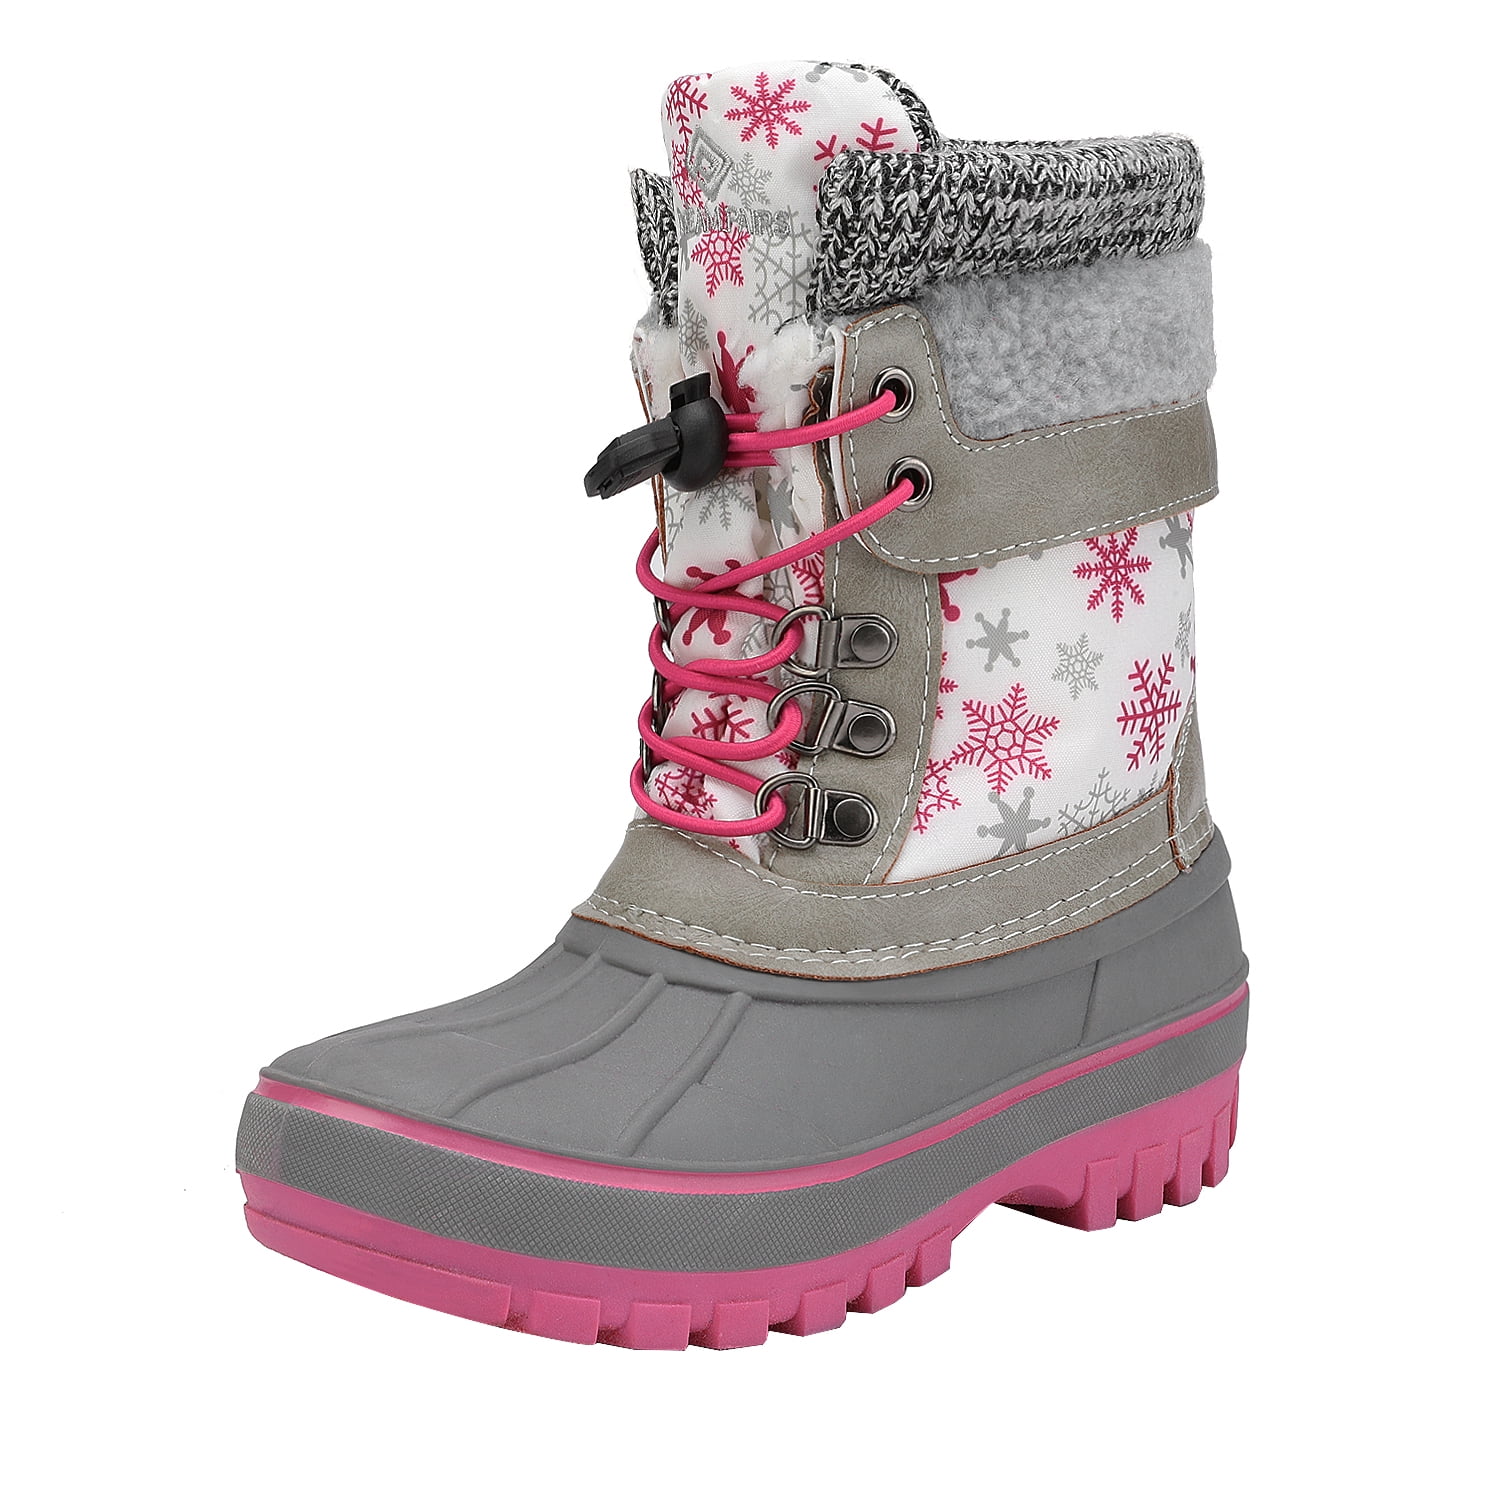 Boys Girls Toddlers Youth Snow Boots Mid Calf Faux Fur Lined Warm Ski Boots 